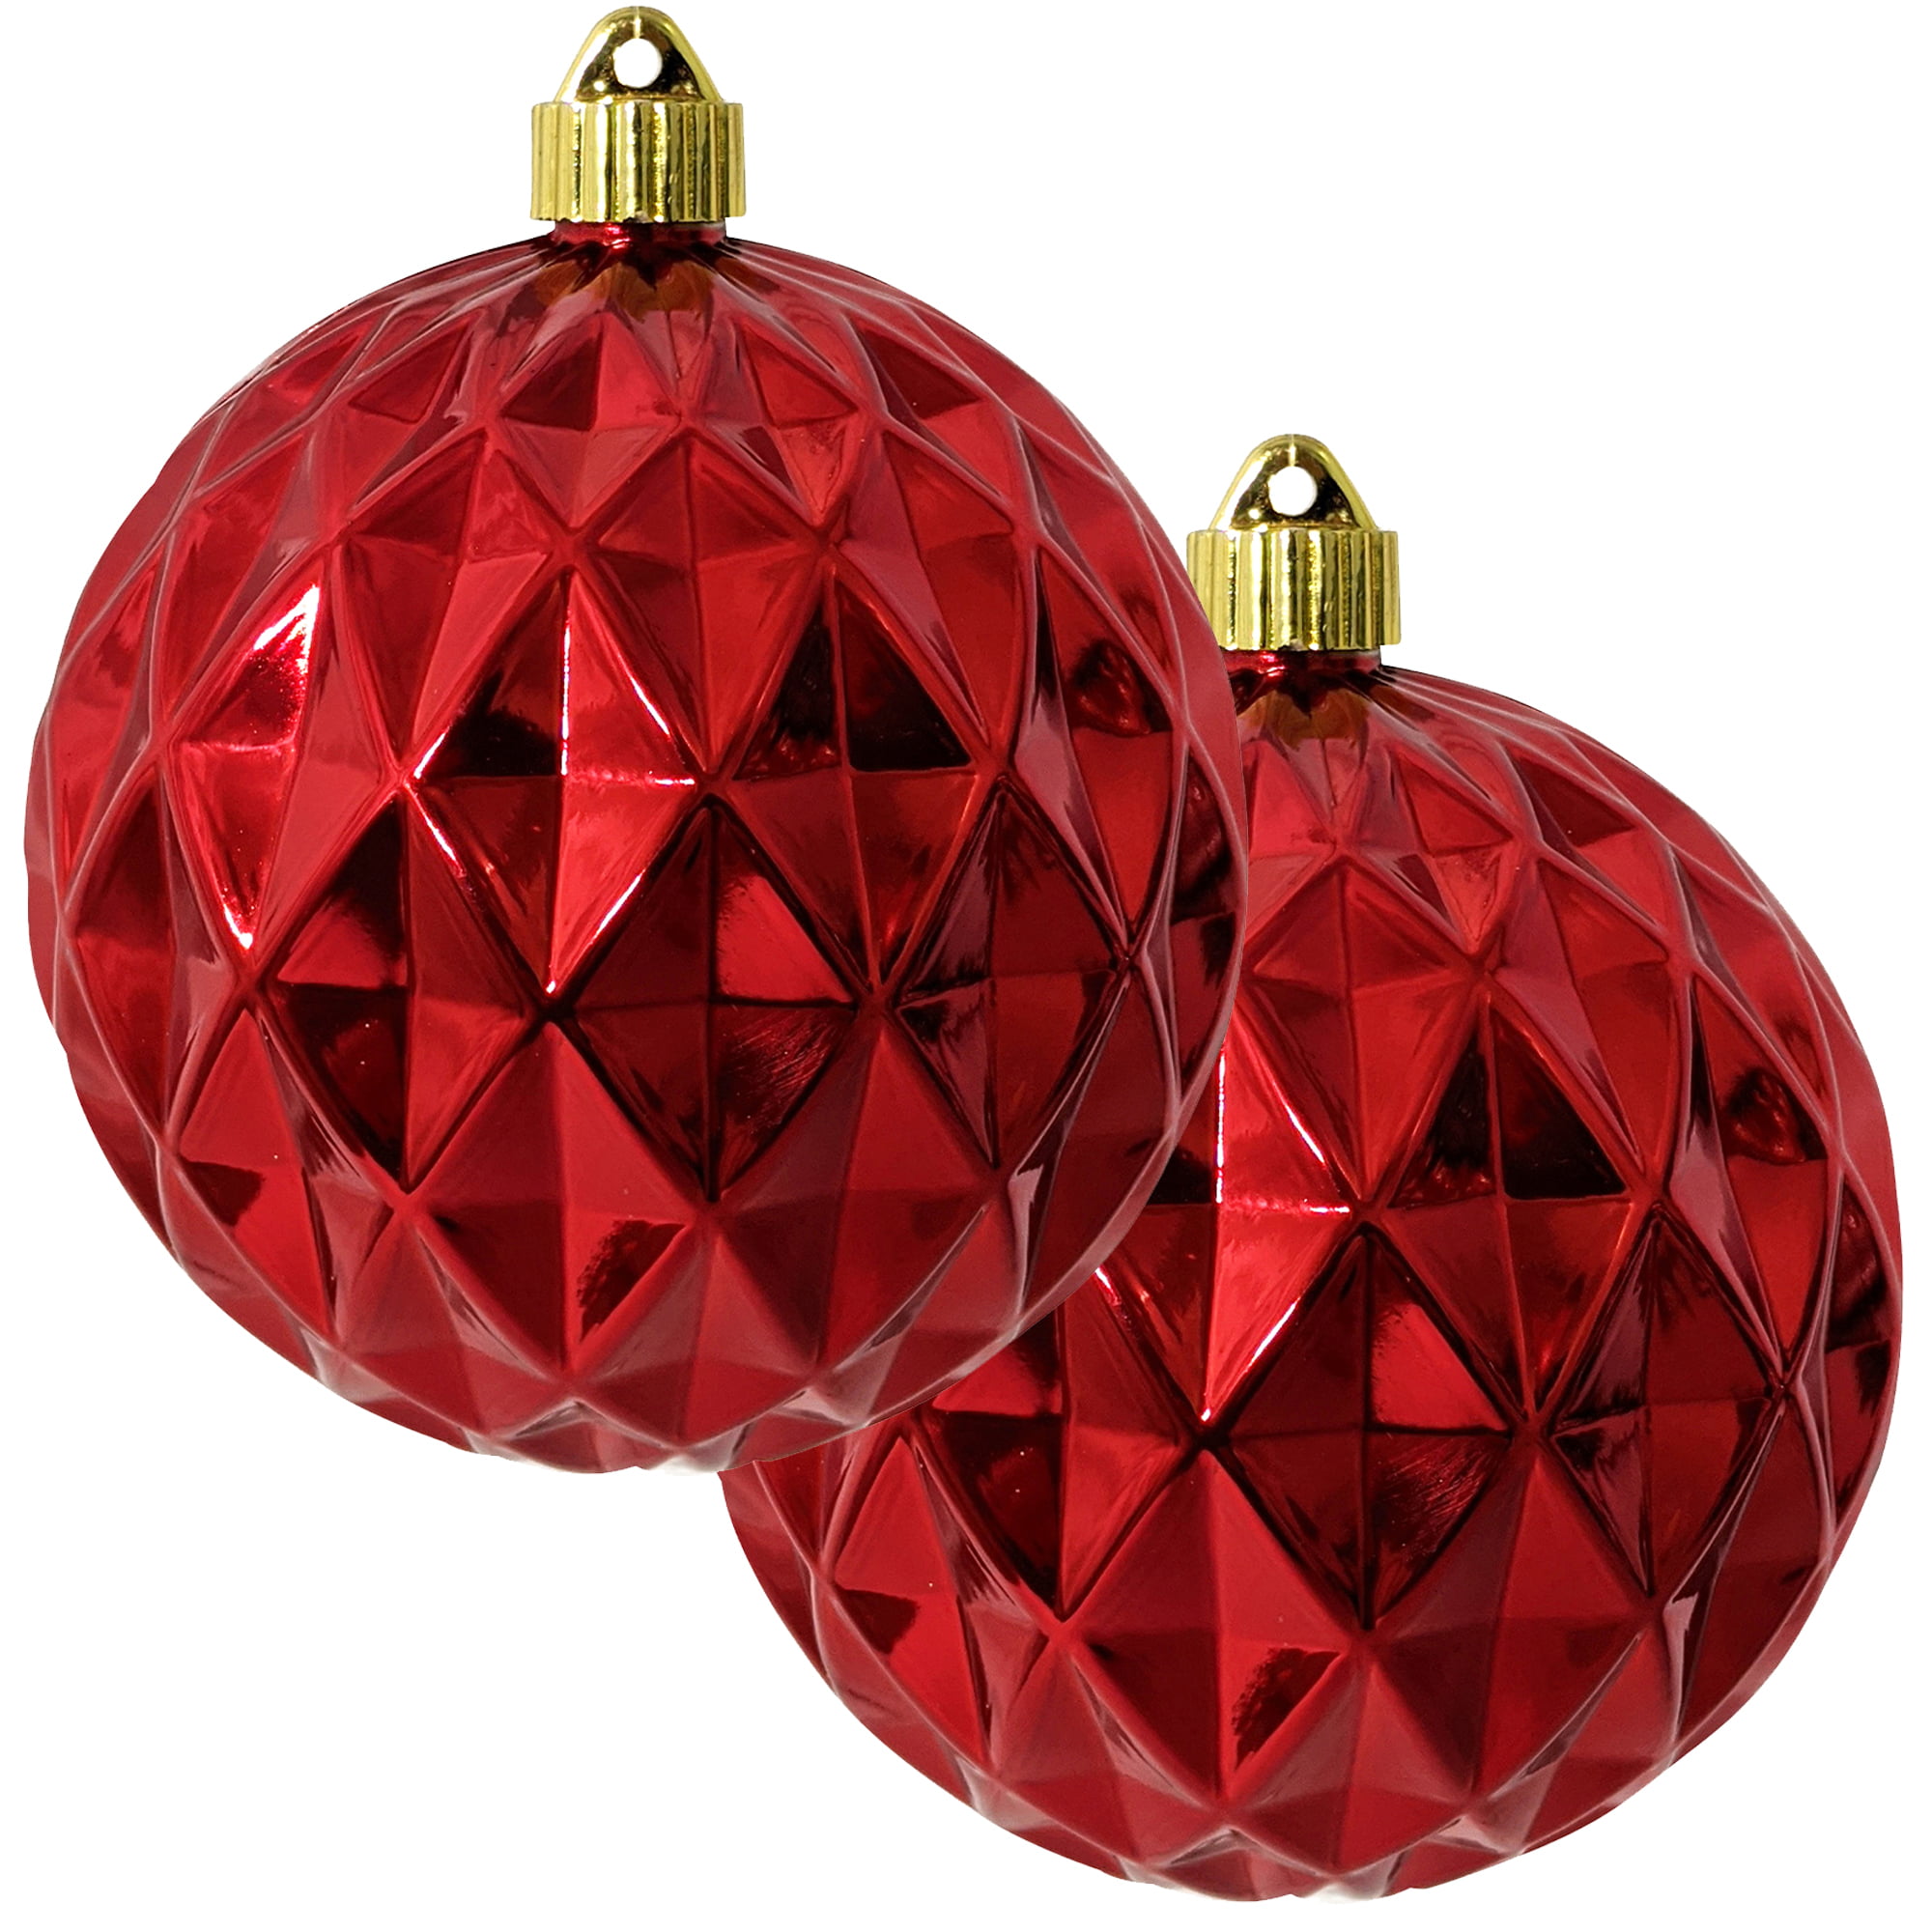 150mm Christmas By Krebs Commercial Grade Shatterproof Indoor Outdoor Plastic Water UV-Resistant Diamond Ball Ornaments 2 Pack Shiny Sonic Red 6